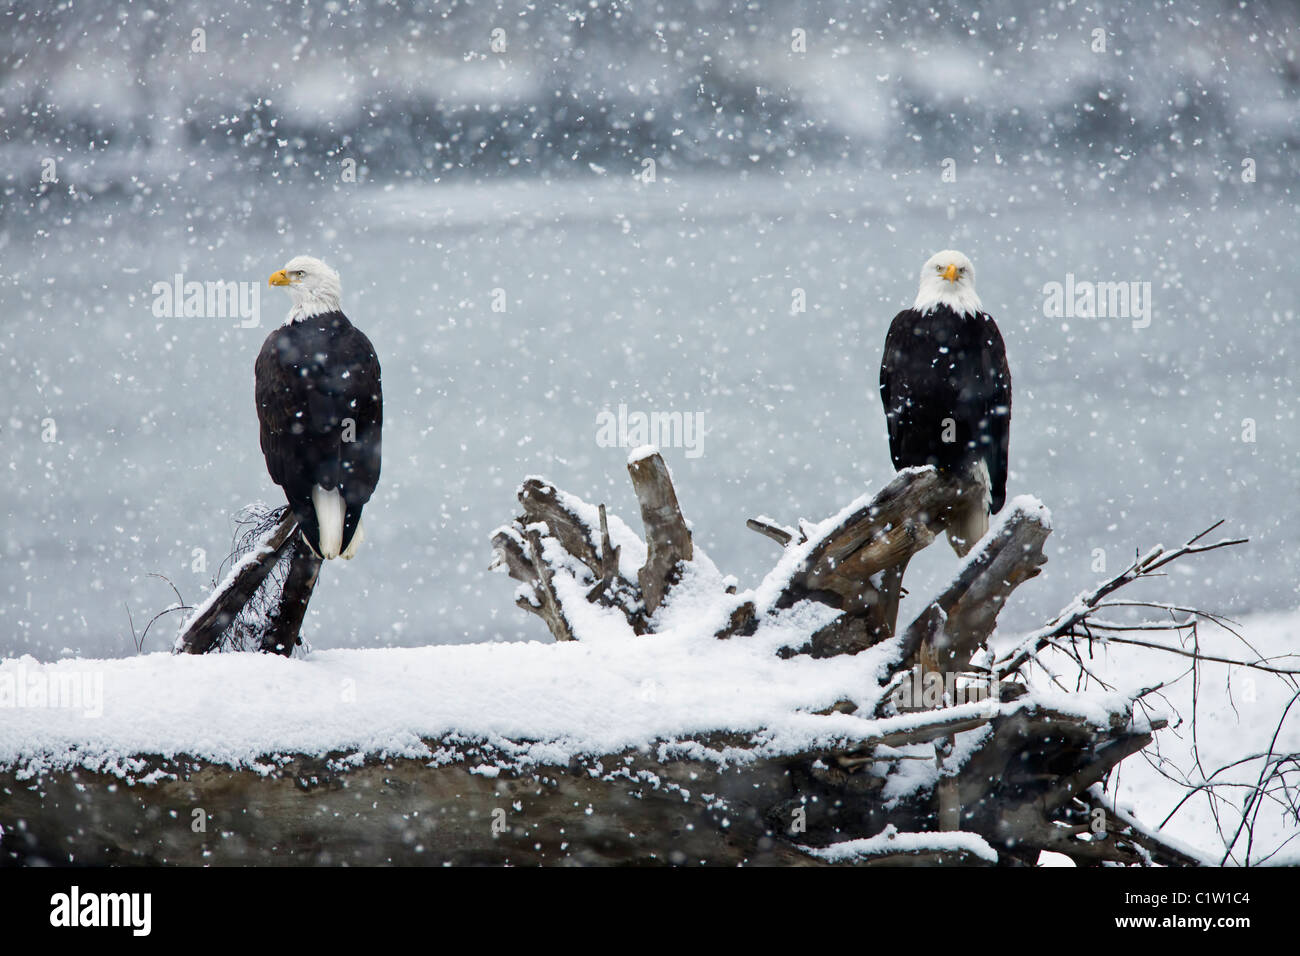 Snow falls on the Chilkat River near as bald eagles looks on perched on a tree stump near Haines in Southeast Alaska. Stock Photo